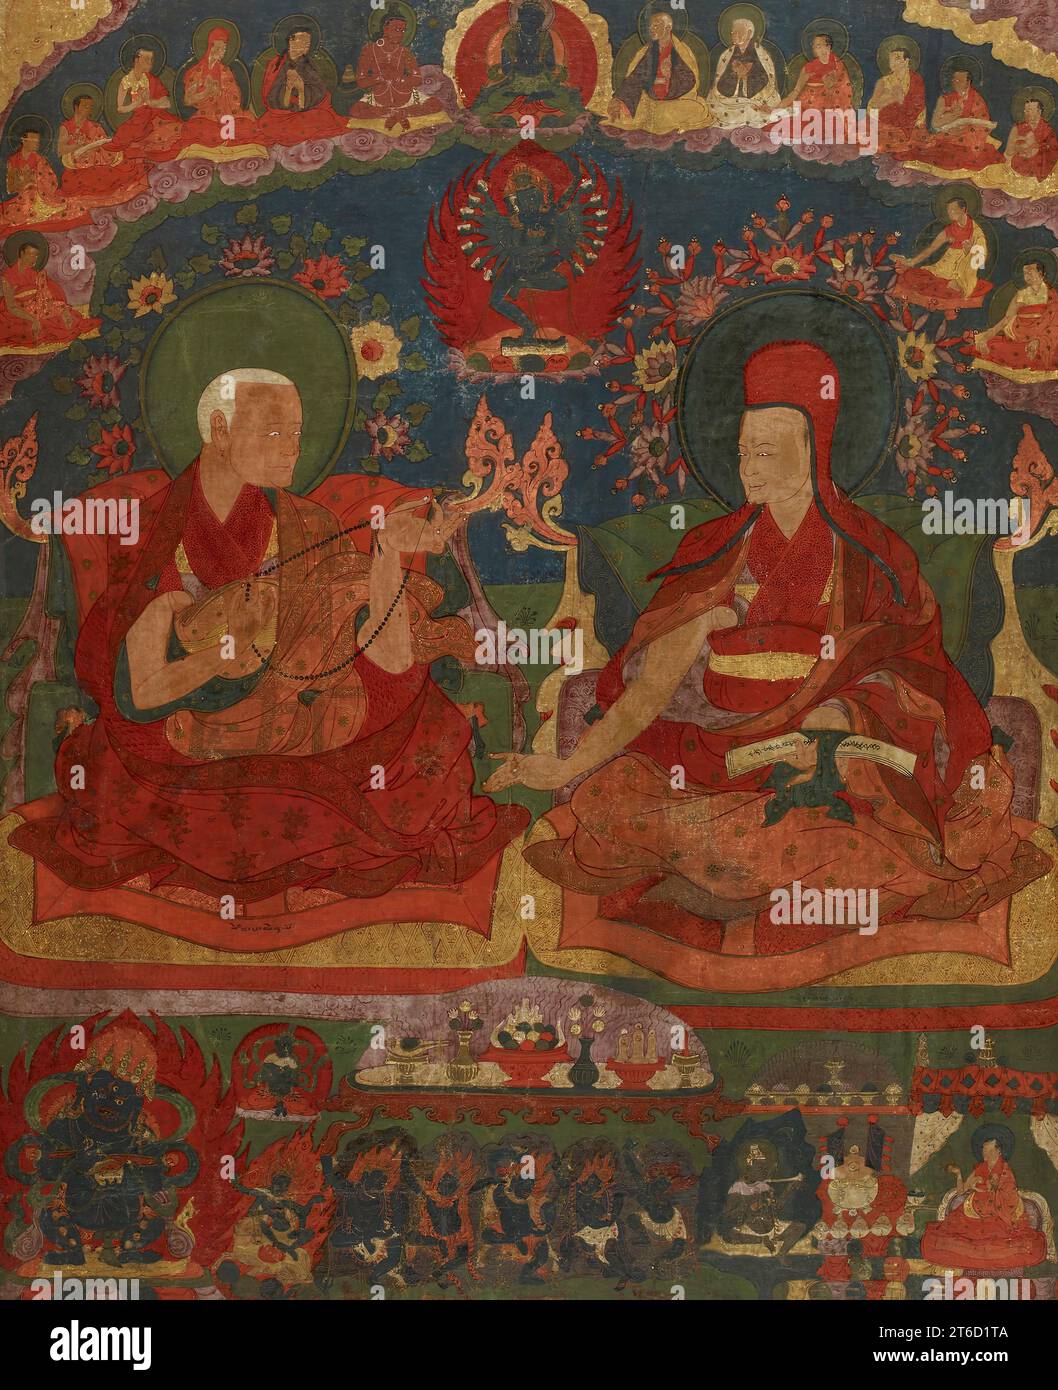 Abbots of the Ngor Monastery, late 16th century. The first two abbots of the Ngor Monastery in central Tibet, the older Sempa Chenpo and the younger Jamyang Sherab Gyatsho, engage in a lively conversation. They may be discussing the teachings of the &quot;Hevajra Tantra&quot;: the wrathful deity Hevajra, united with his female partner, occupies the space between their flowered halos. Above Hevajra is the Buddha Vajradhara, the ultimate source of the tantra&#x2019;s teachings, surrounded by members of the teaching lineage. The fifth figure on the left wears a red hat identical to that of the yo Stock Photo